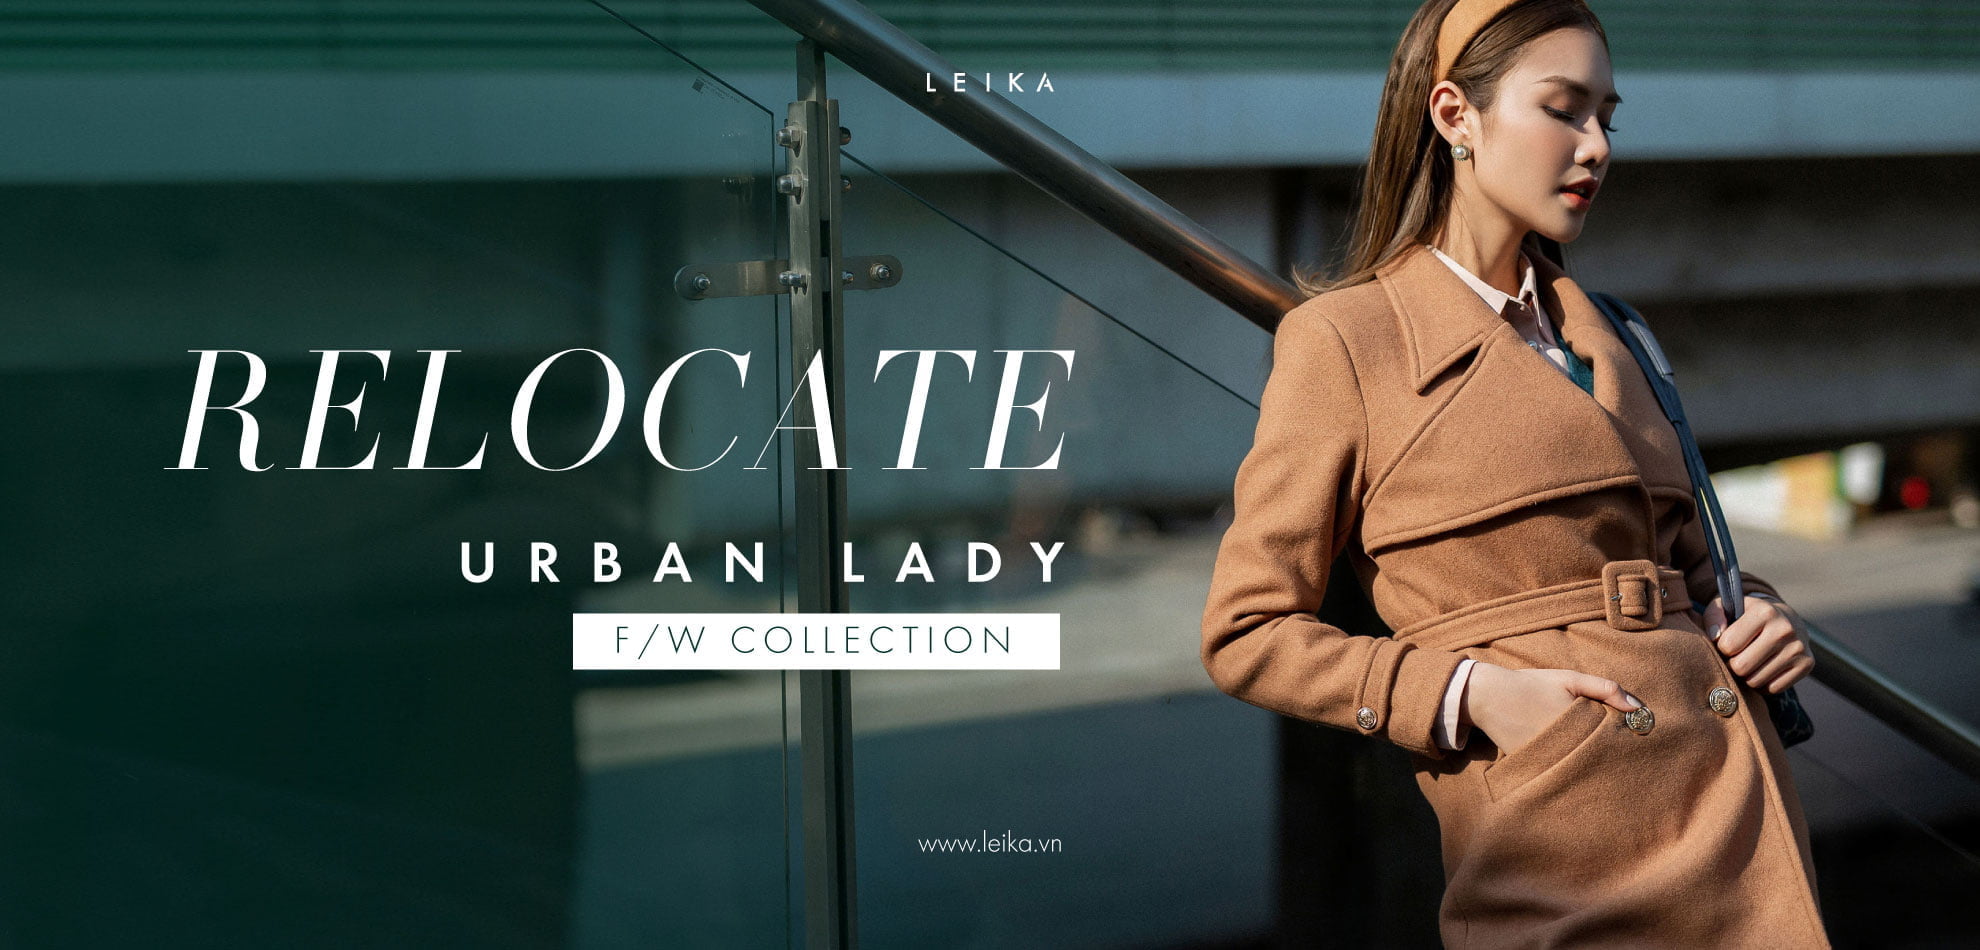 Relocate - Urban Lady | Collection 2021 by Leika